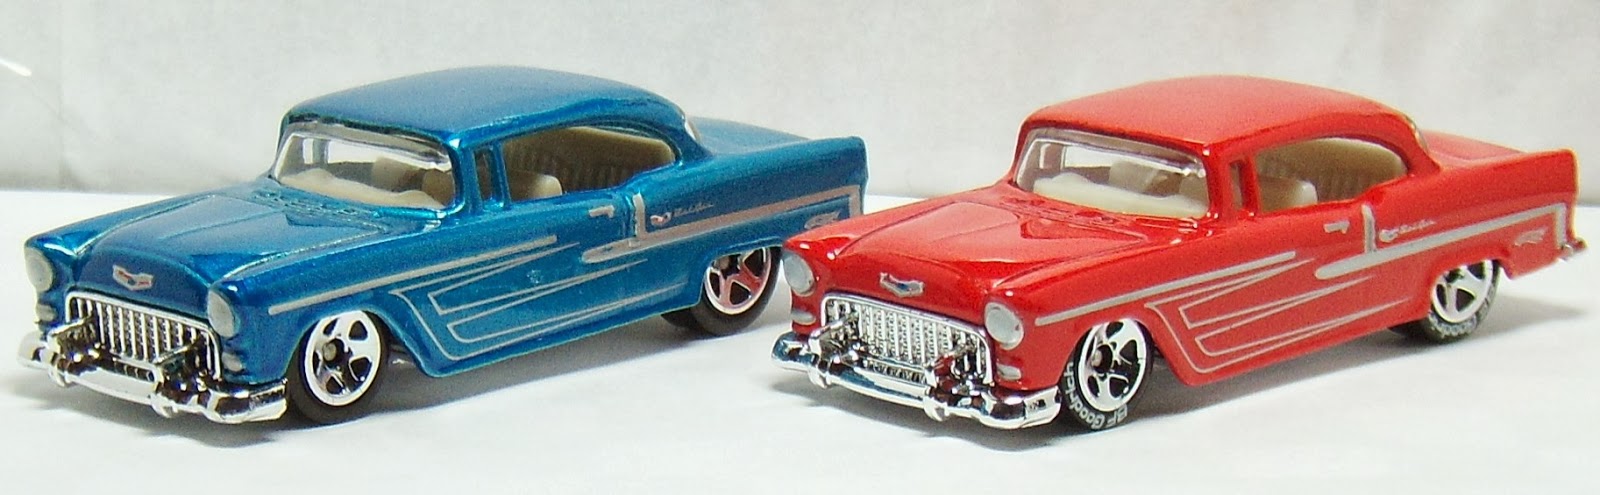 Hot Wheels 1955 Chevy Bel Air And Nomad